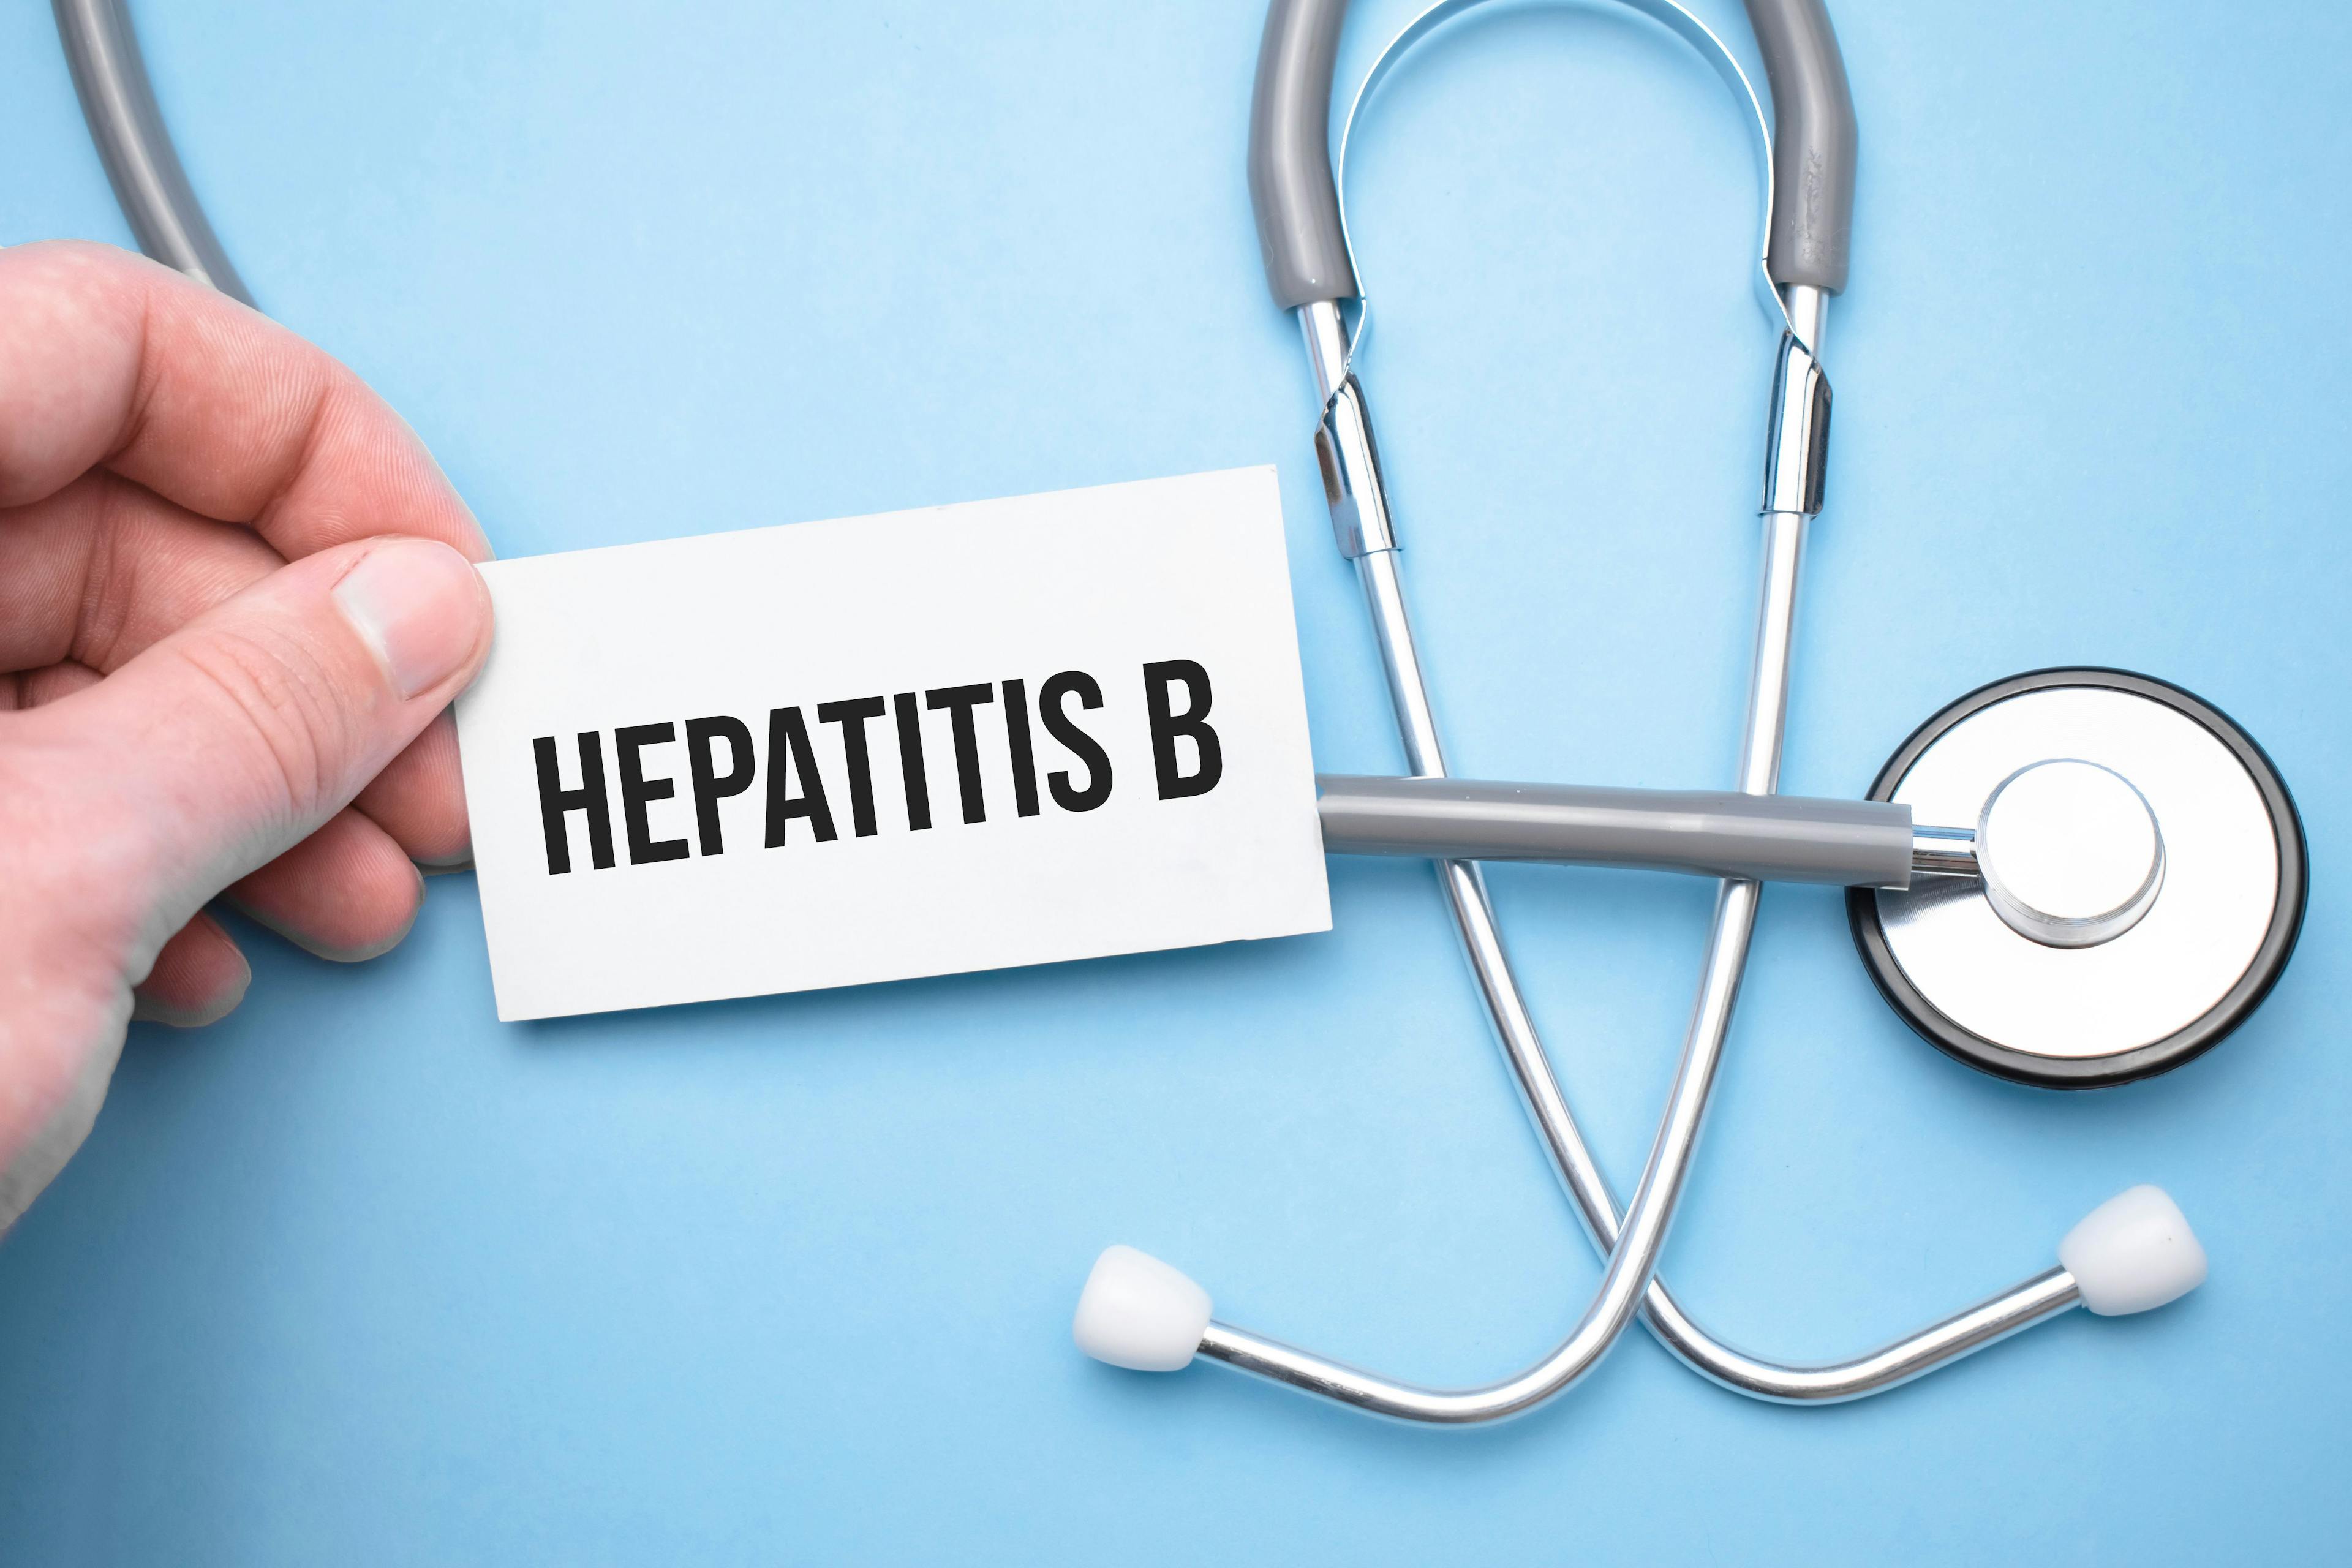 Why Is There Such A Large Disparity In Who Meets Critera For Hepatitis B Treatment?